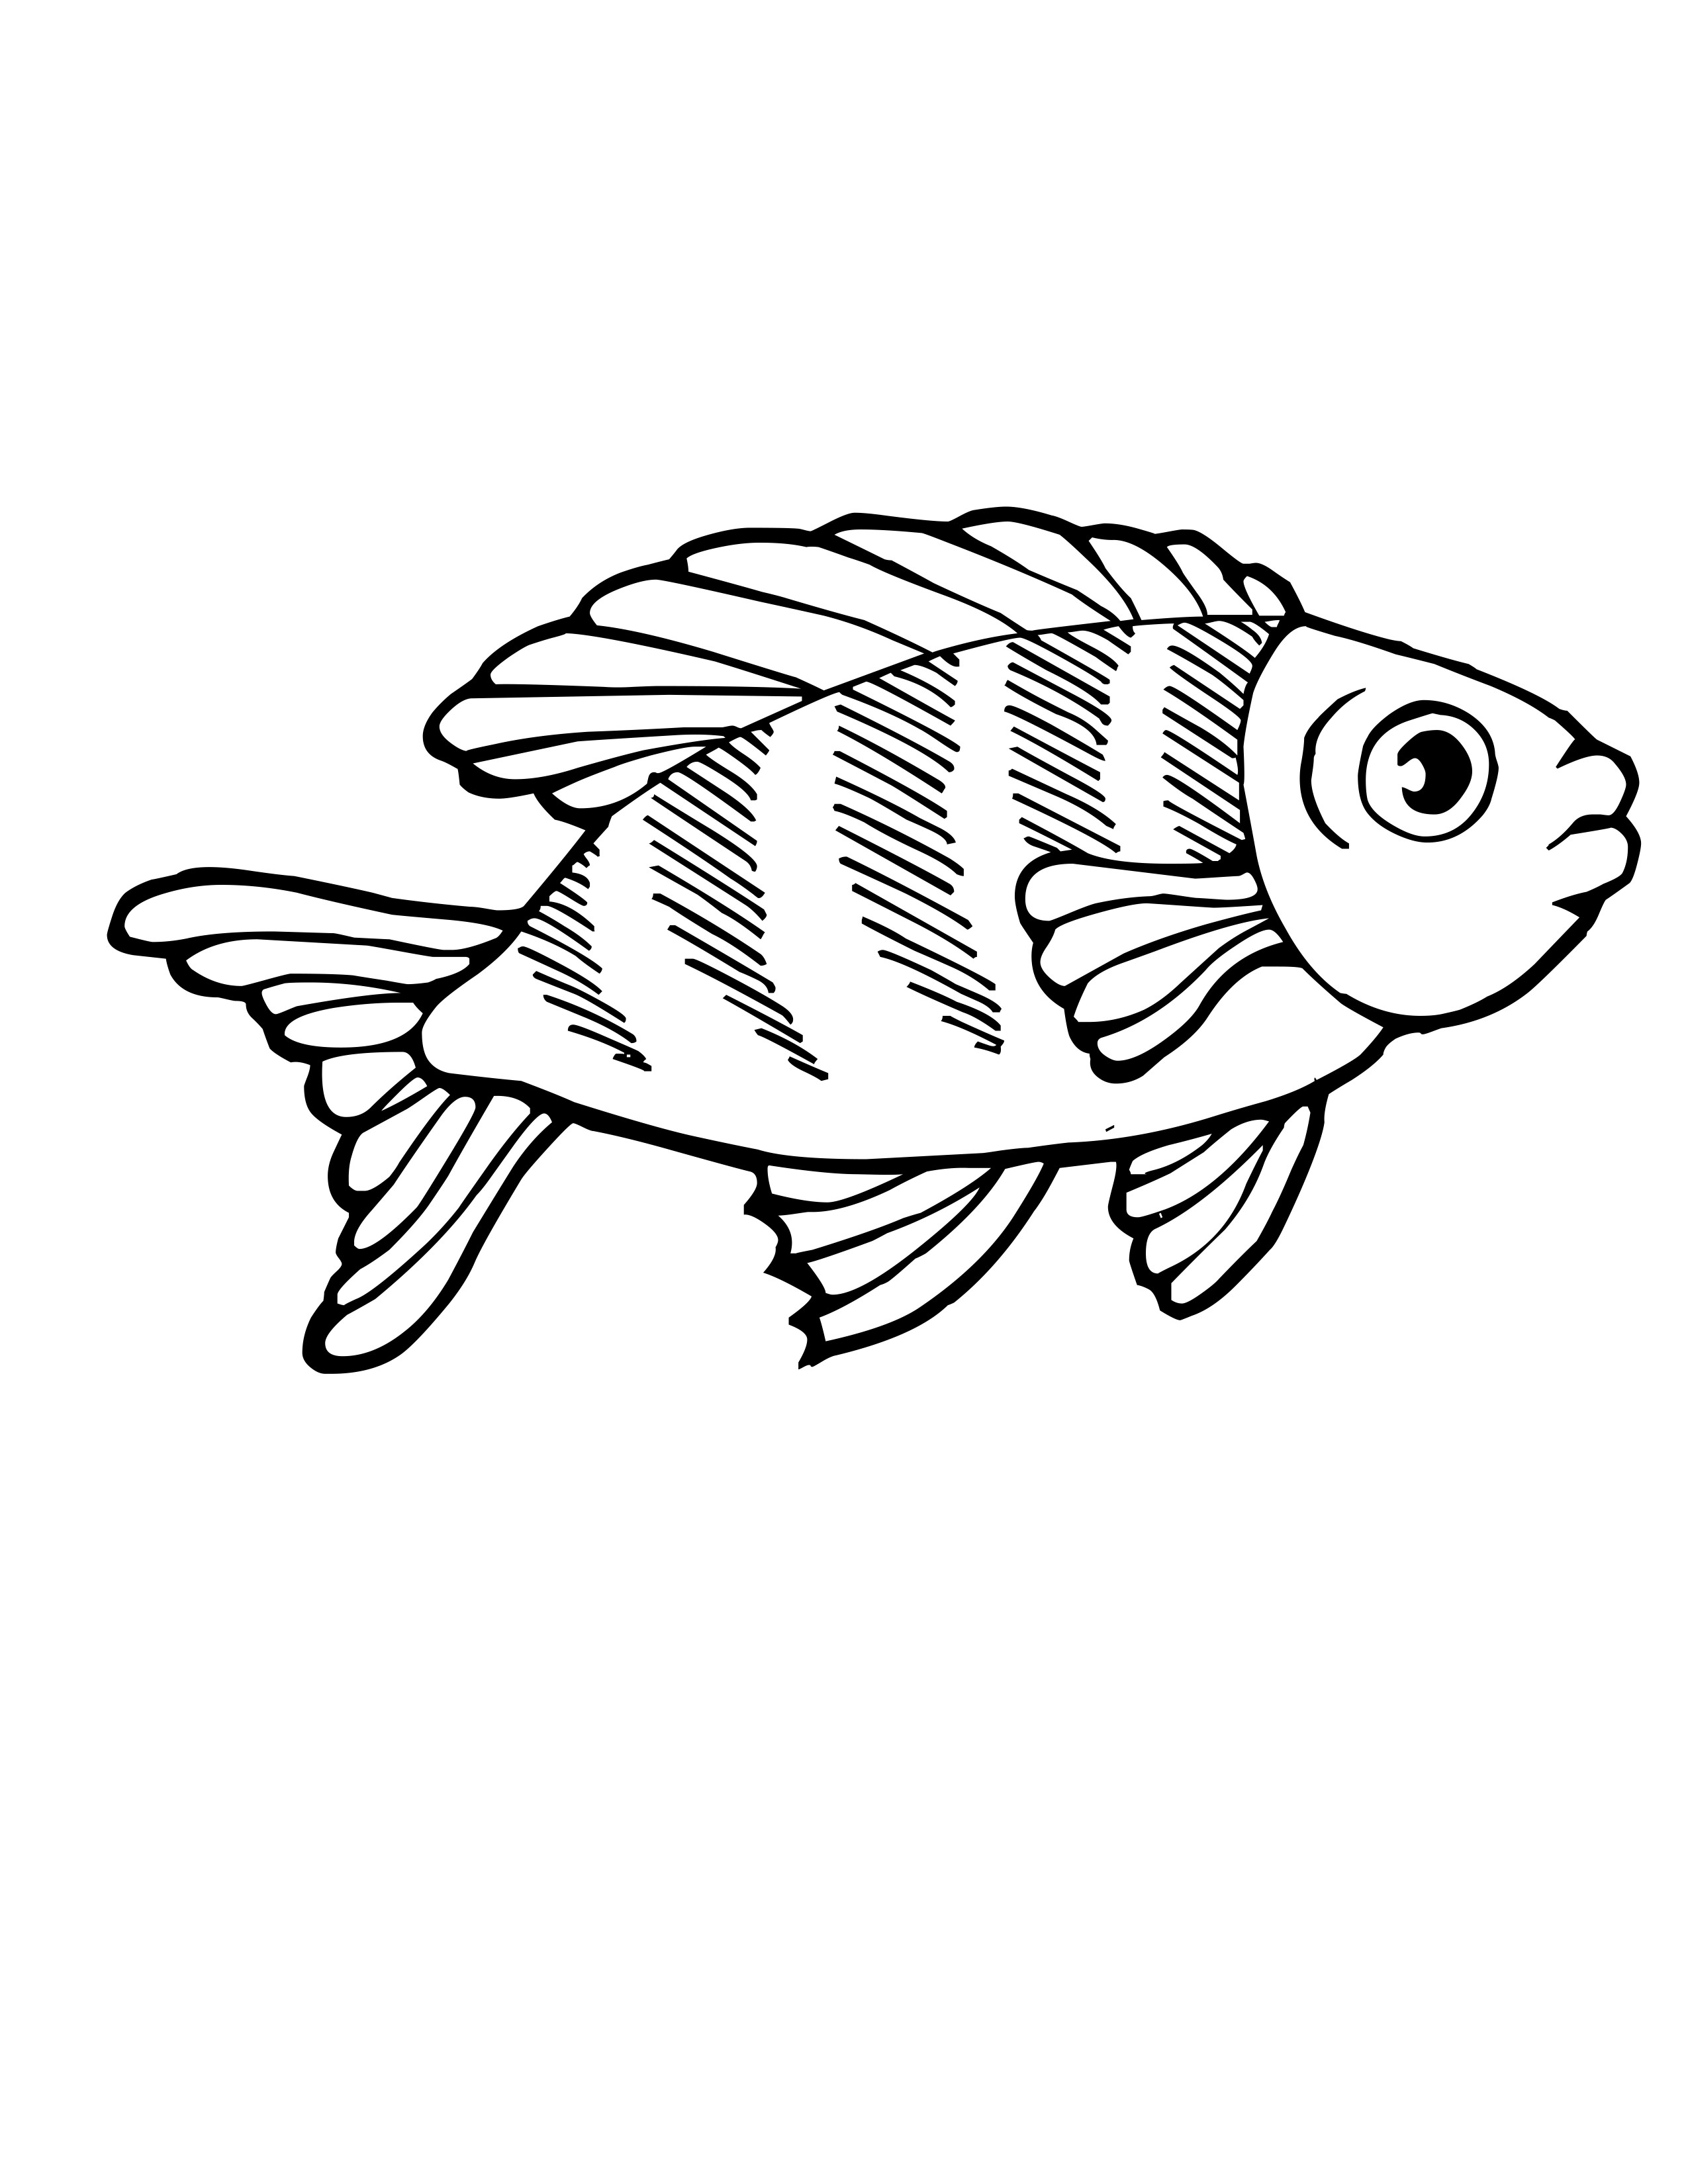 Koi Fish Coloring Page - ClipArt Best - ClipArt Best